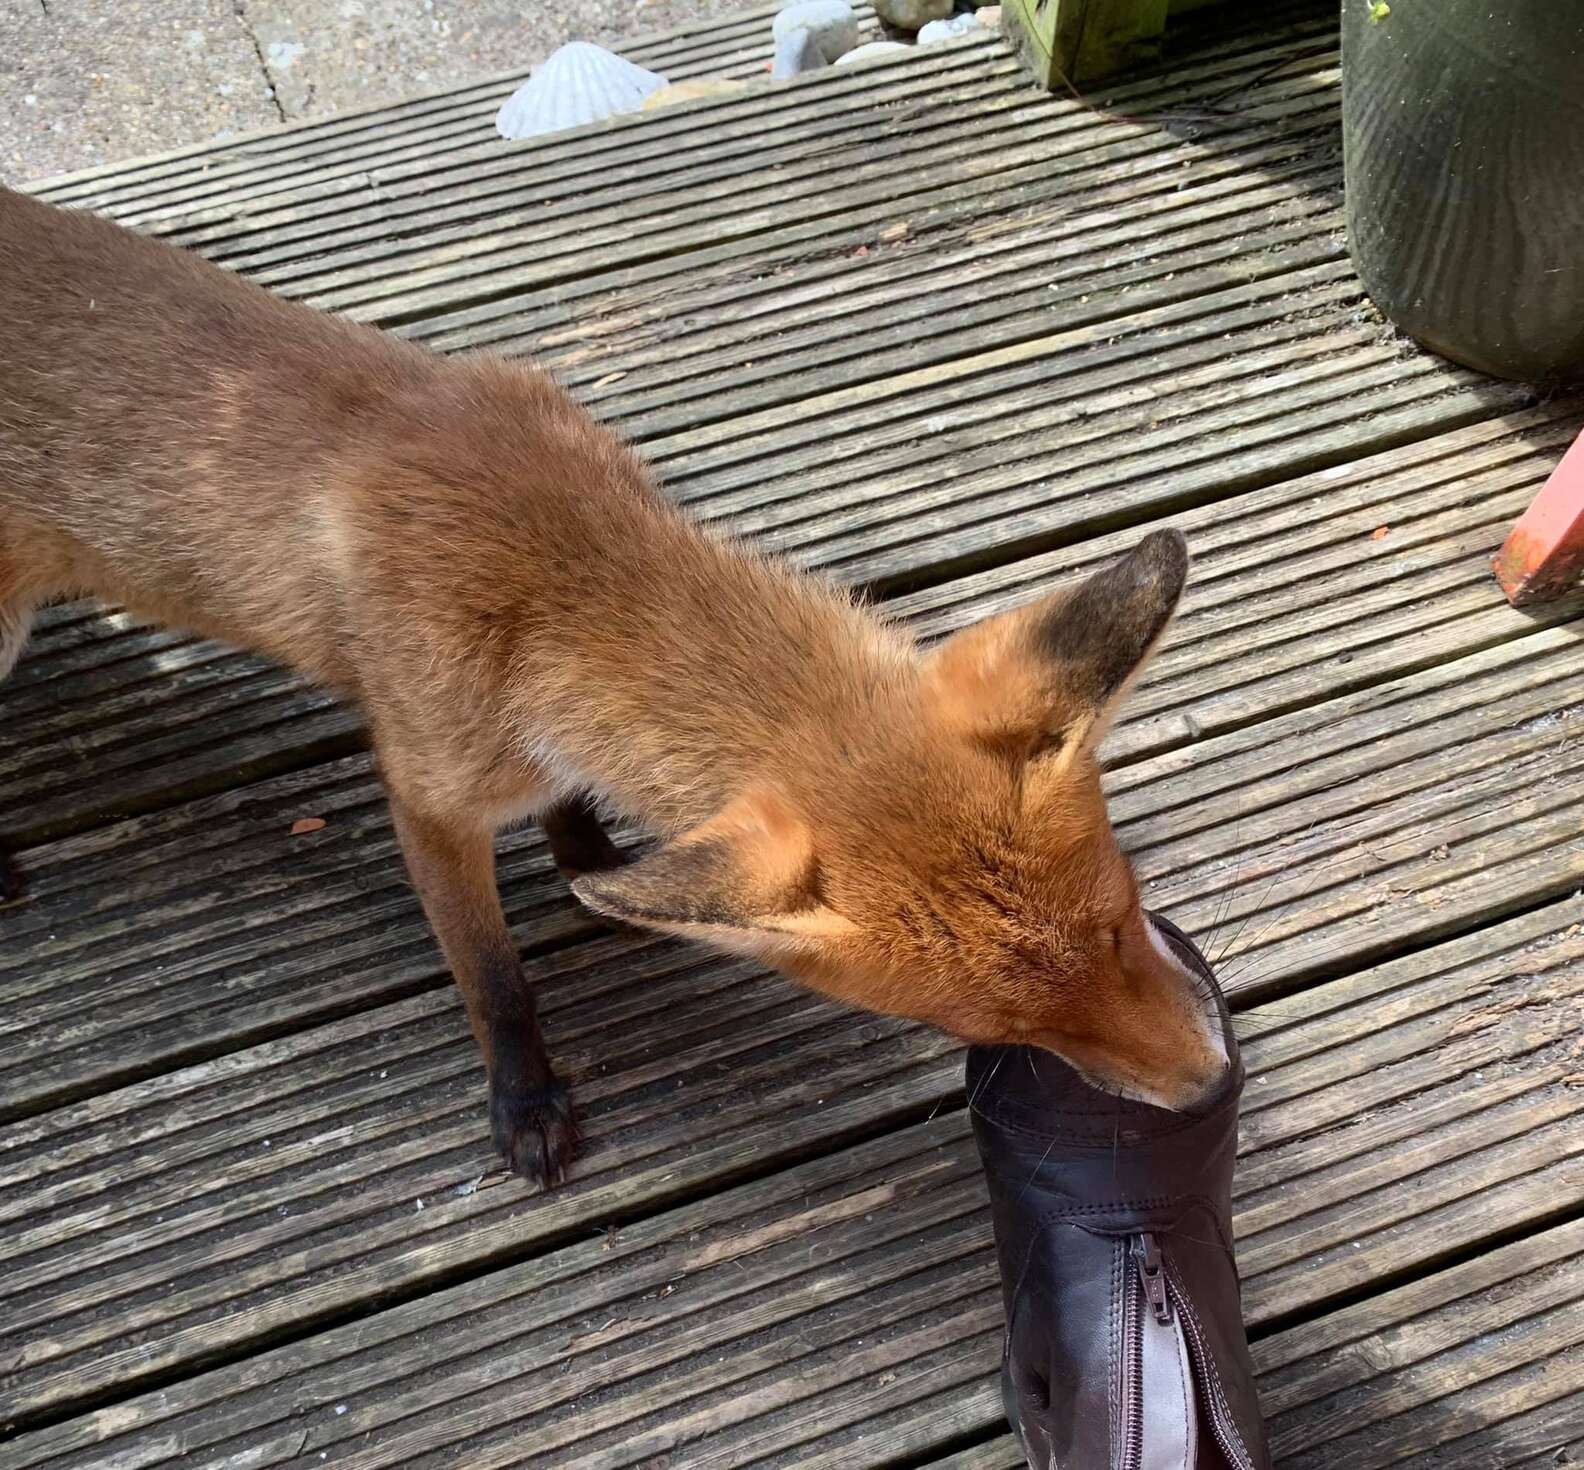 Fox Finds Safe Haven in Woman's Yard